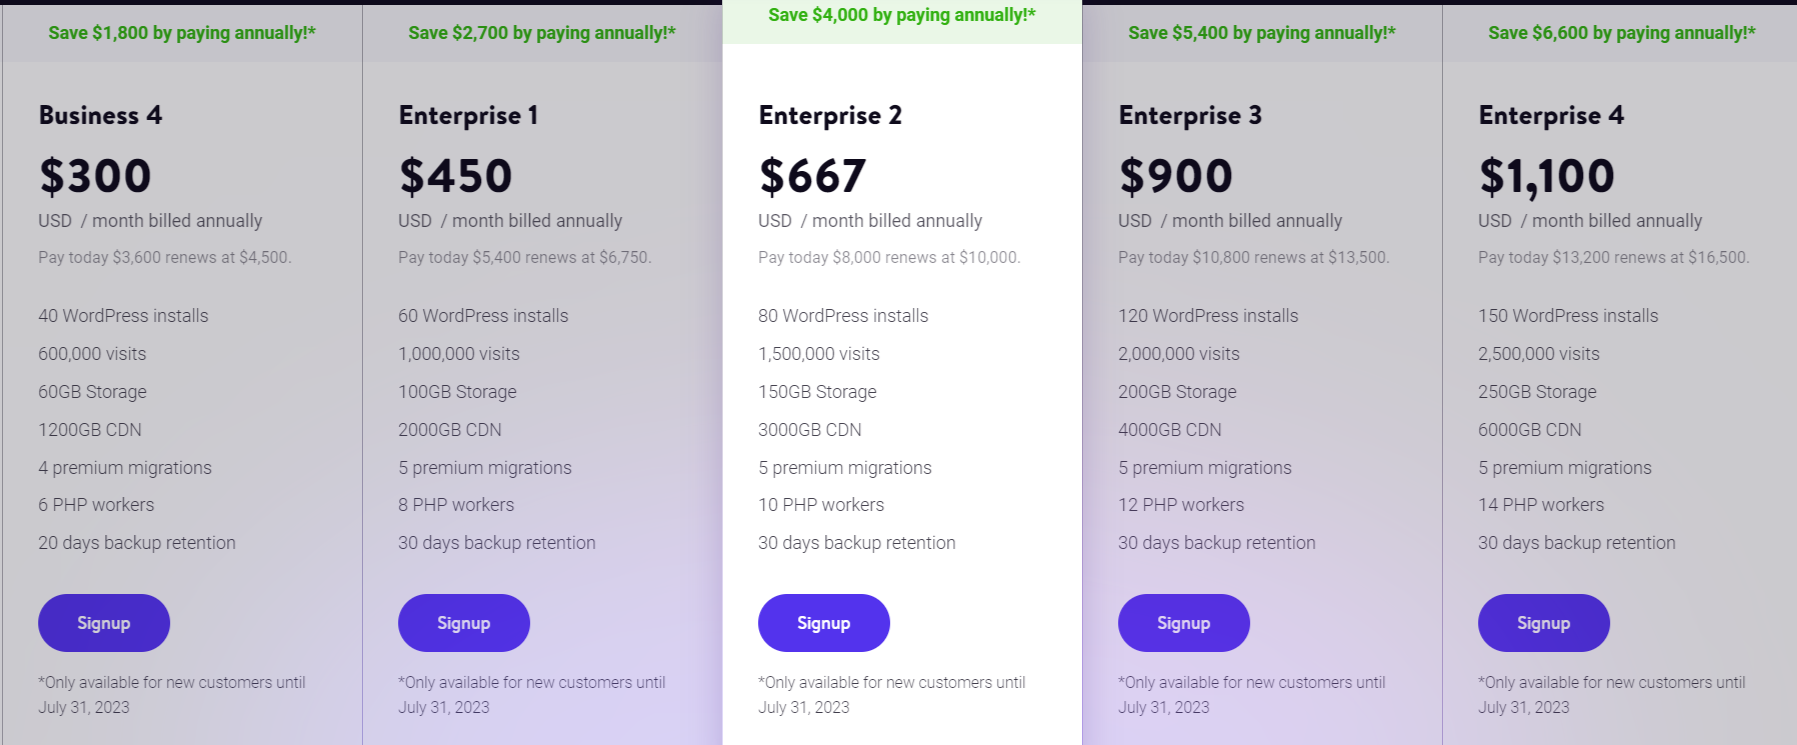 kinsta review - pricing plans 2